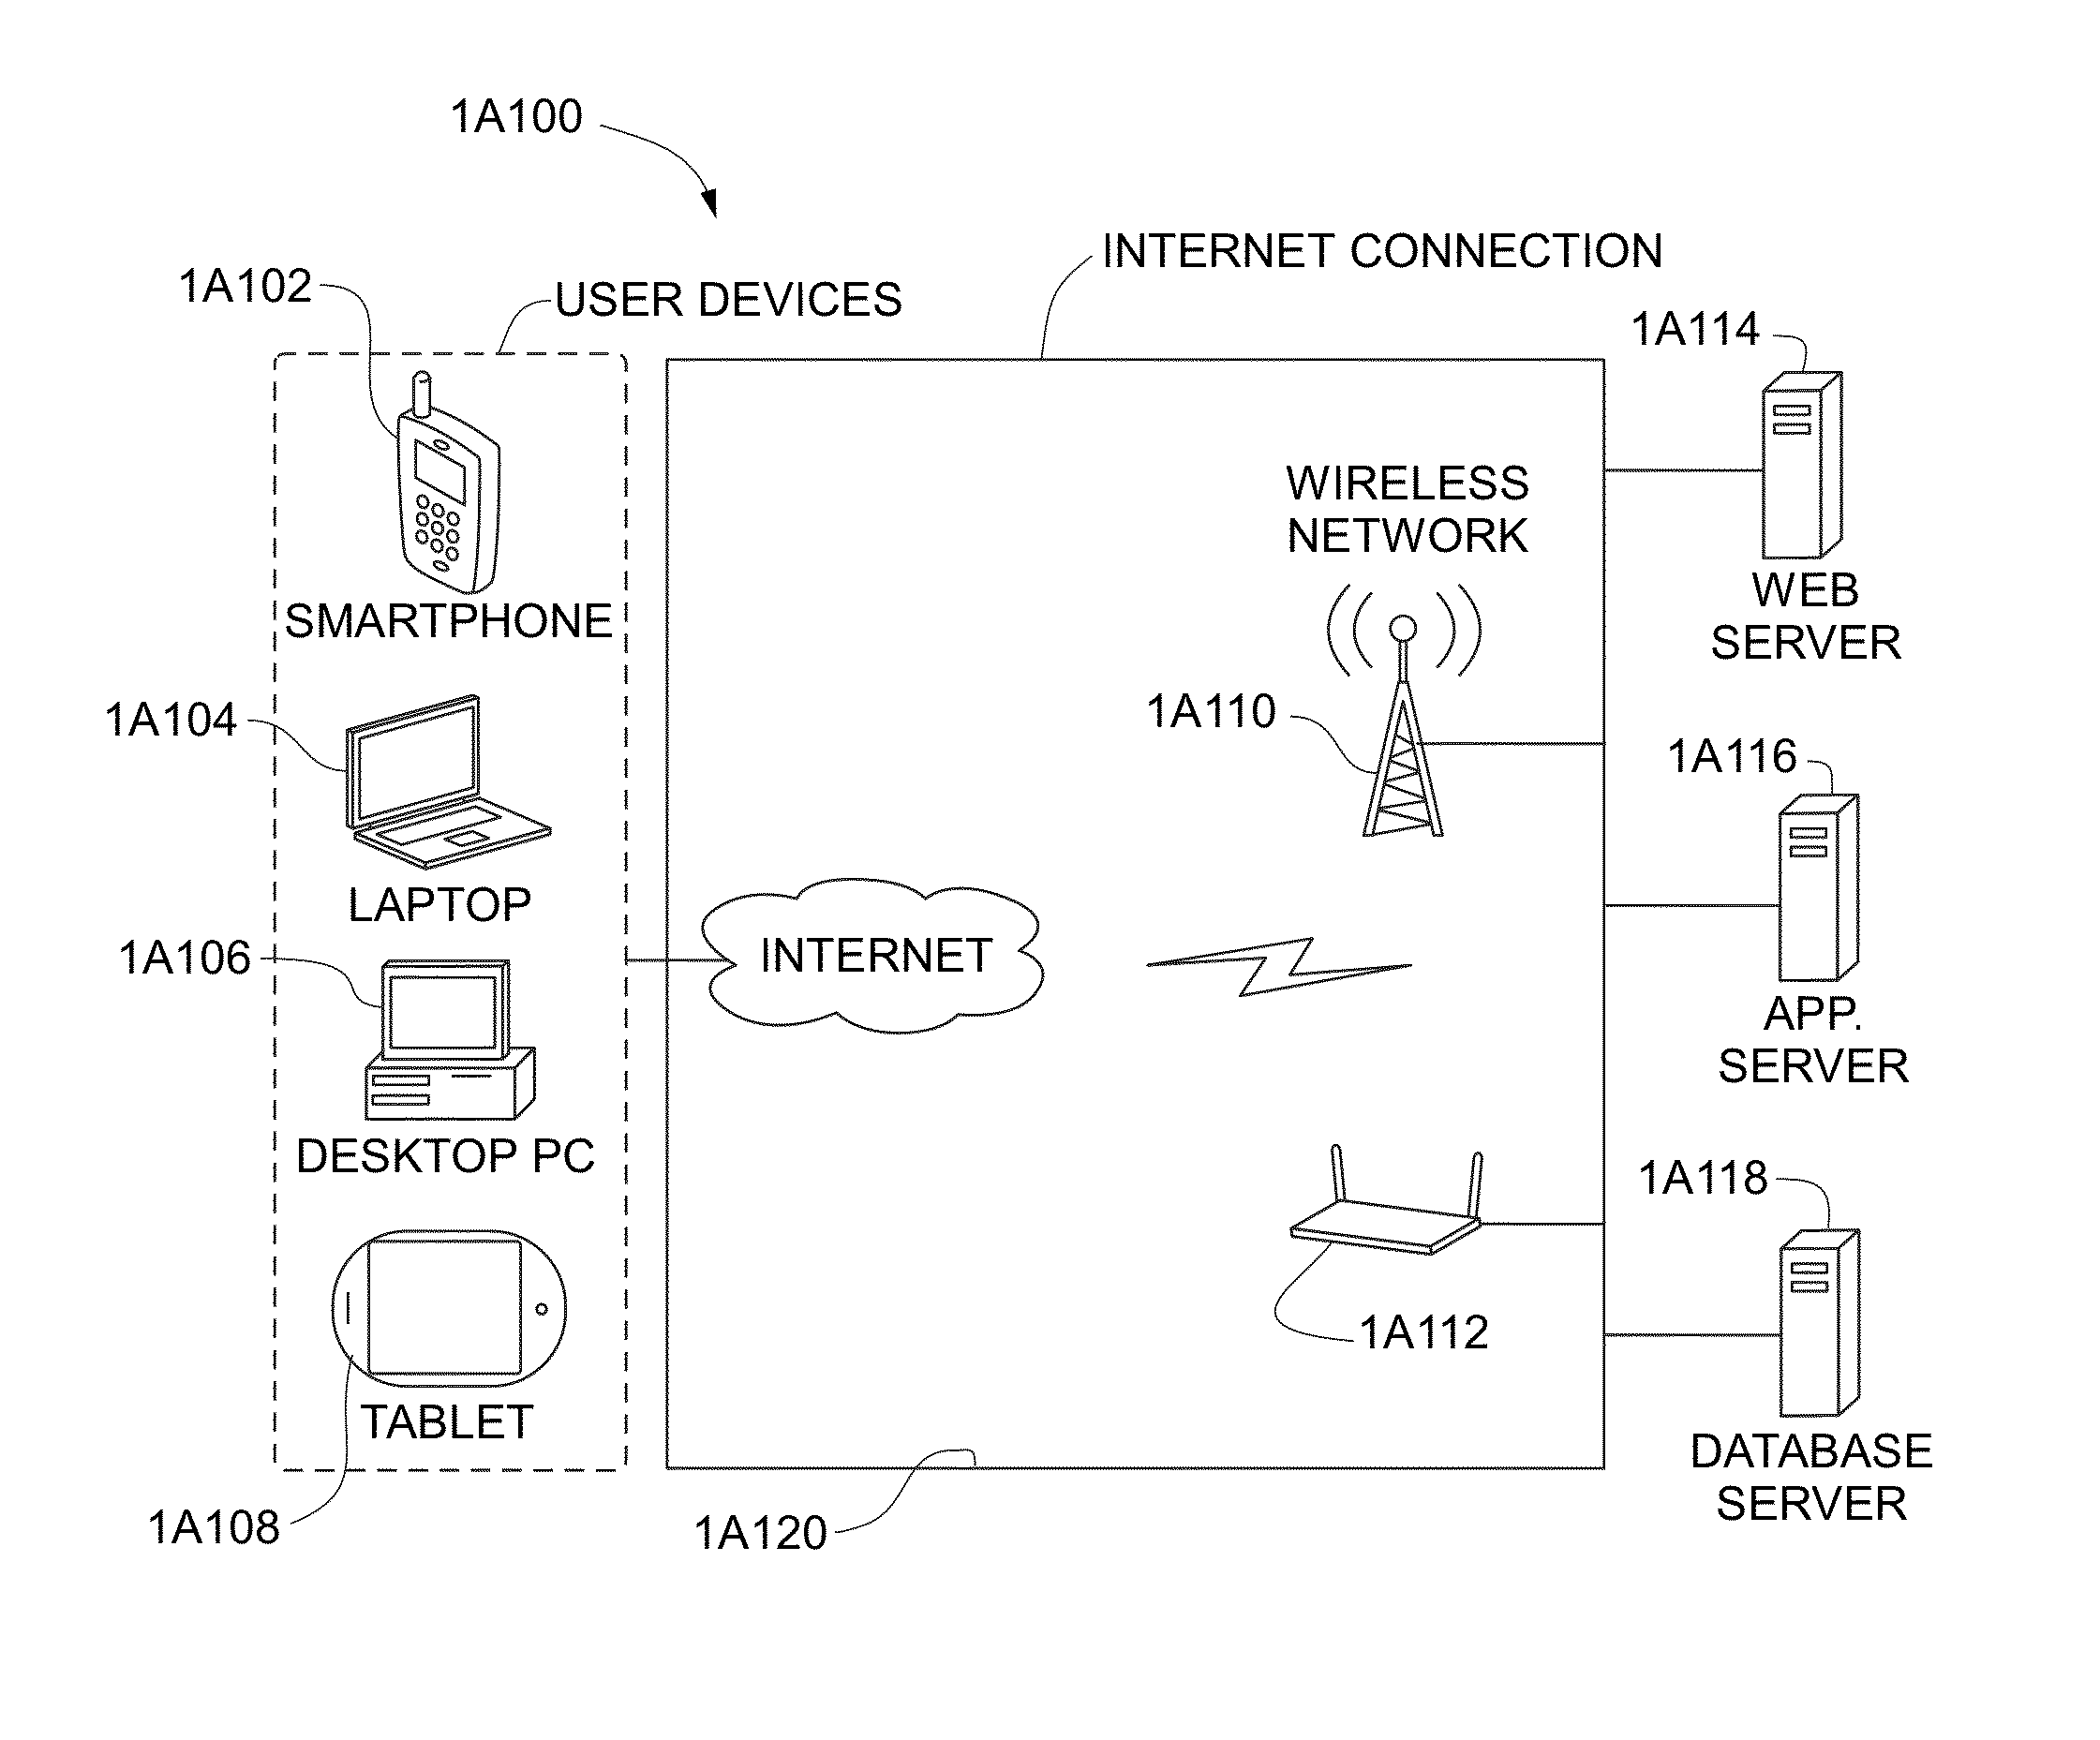 Systems and methods for generating autoflow of content based on image and user analysis as well as use case data for a media-based printable product